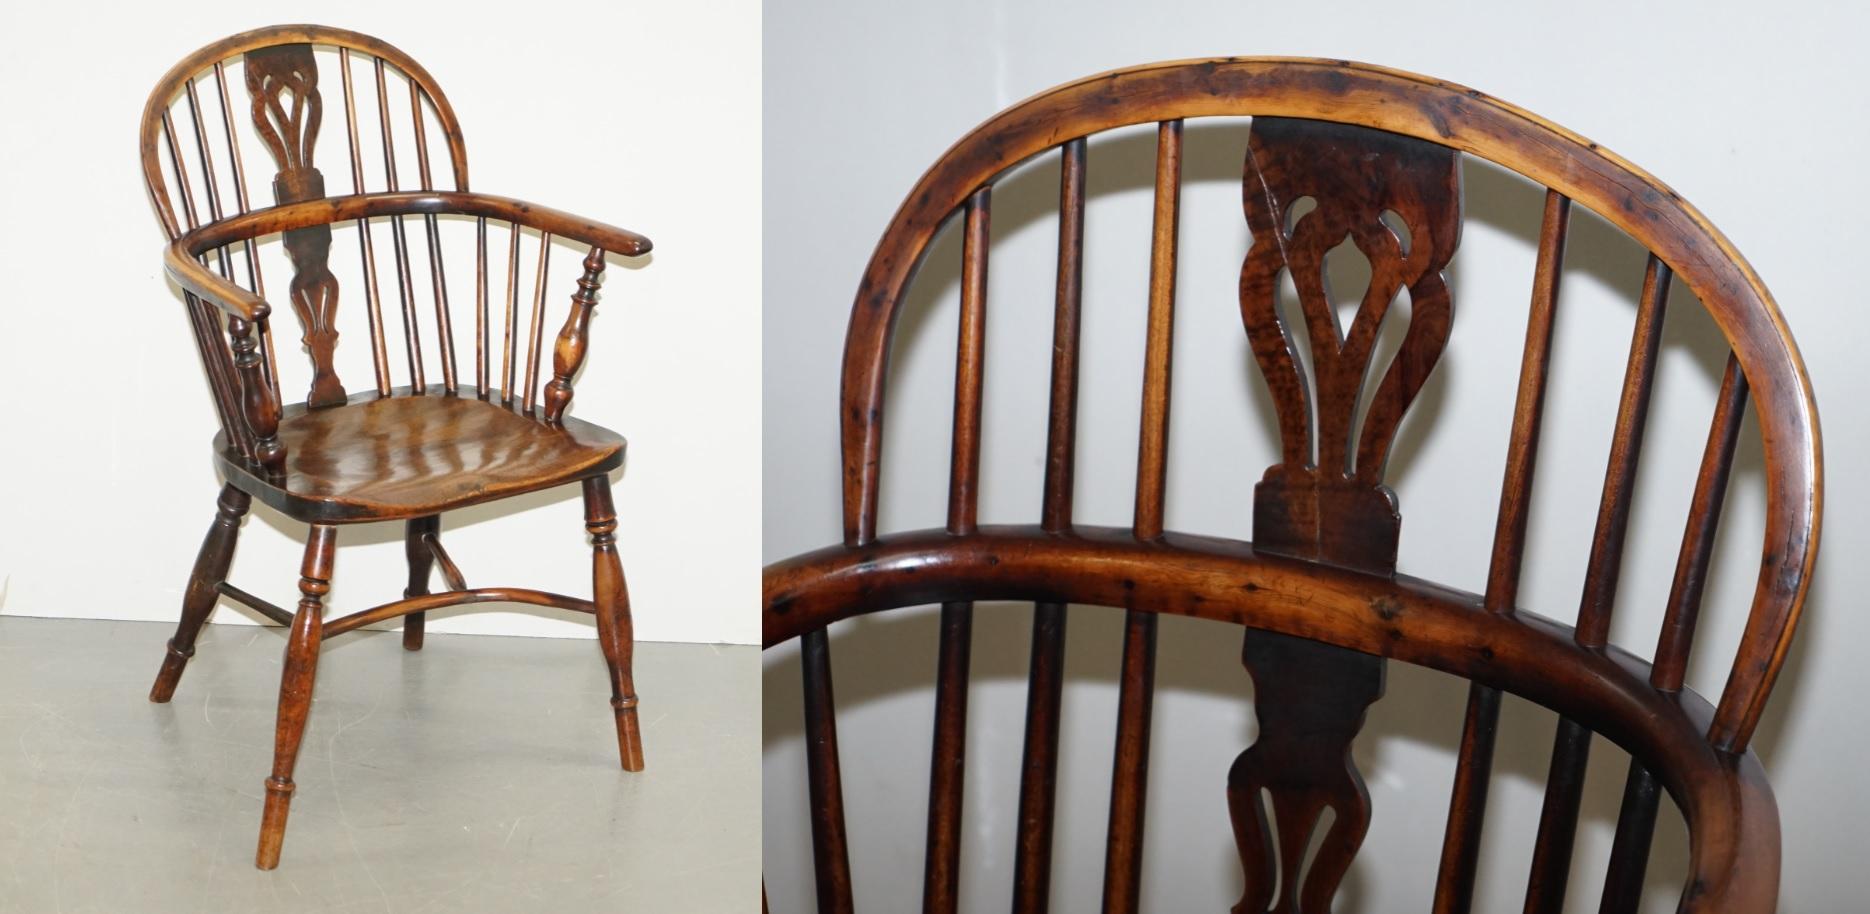 We are delighted to offer for sale 1 of 6 lovely solid Burr Yew with Elm seat hand sawn circa 1860 Windsor stick back armchair

The antique Windsor chair is a country piece of antique furniture that usually comes with lovely charm and character.